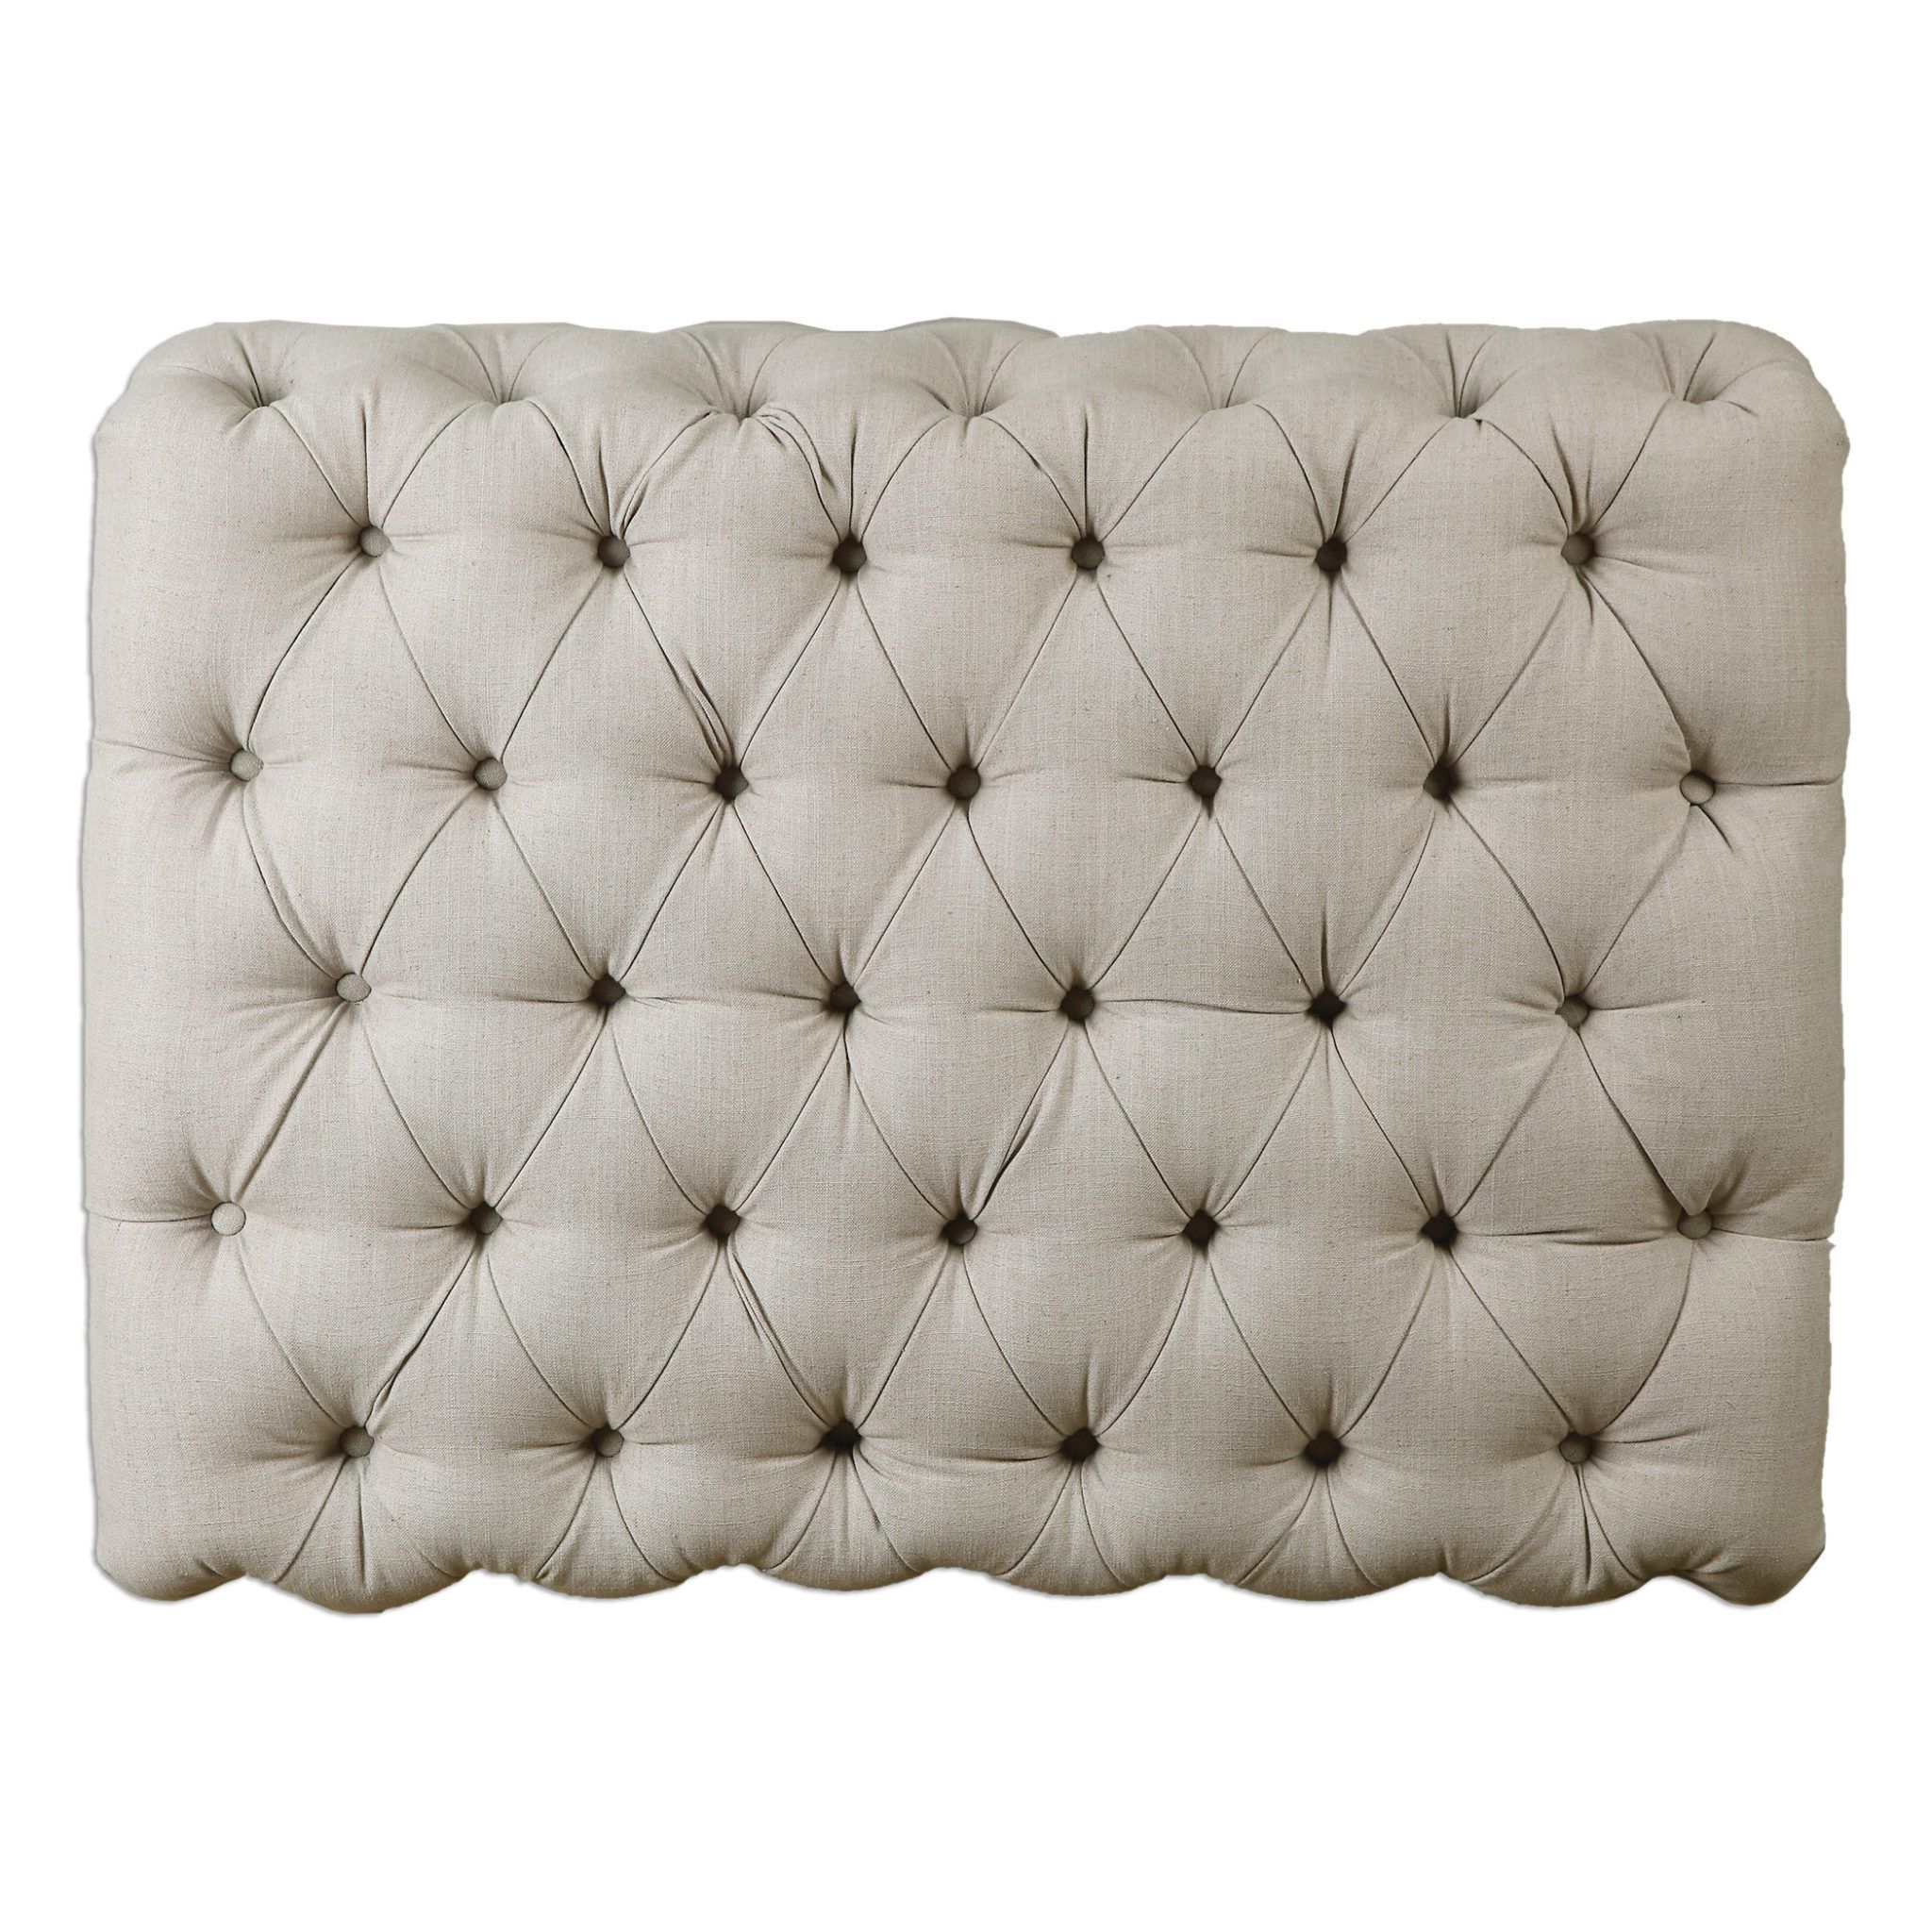 Kaniel Tufted Antique White Ottoman | Painted Fox Home With Regard To Gray And Beige Trellis Cylinder Pouf Ottomans (View 1 of 20)